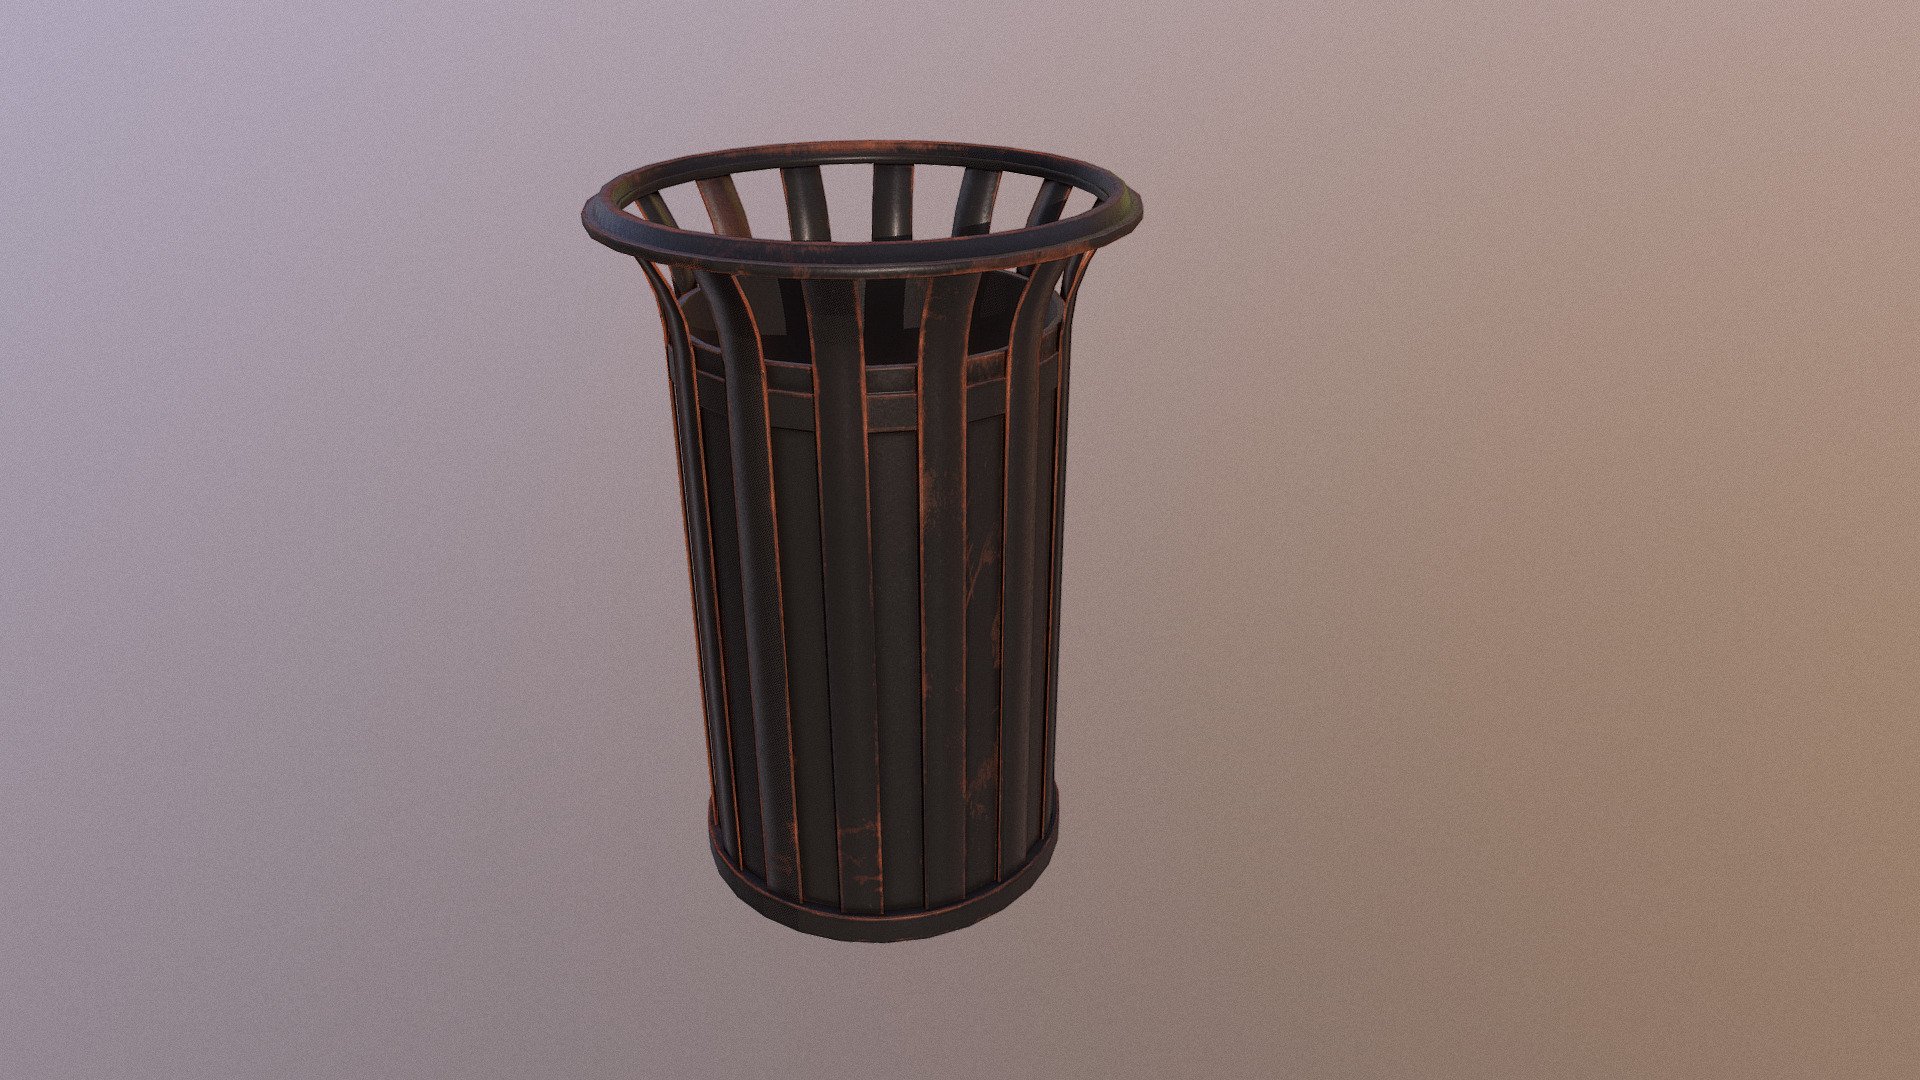 A simple game ready trash can model 3d model